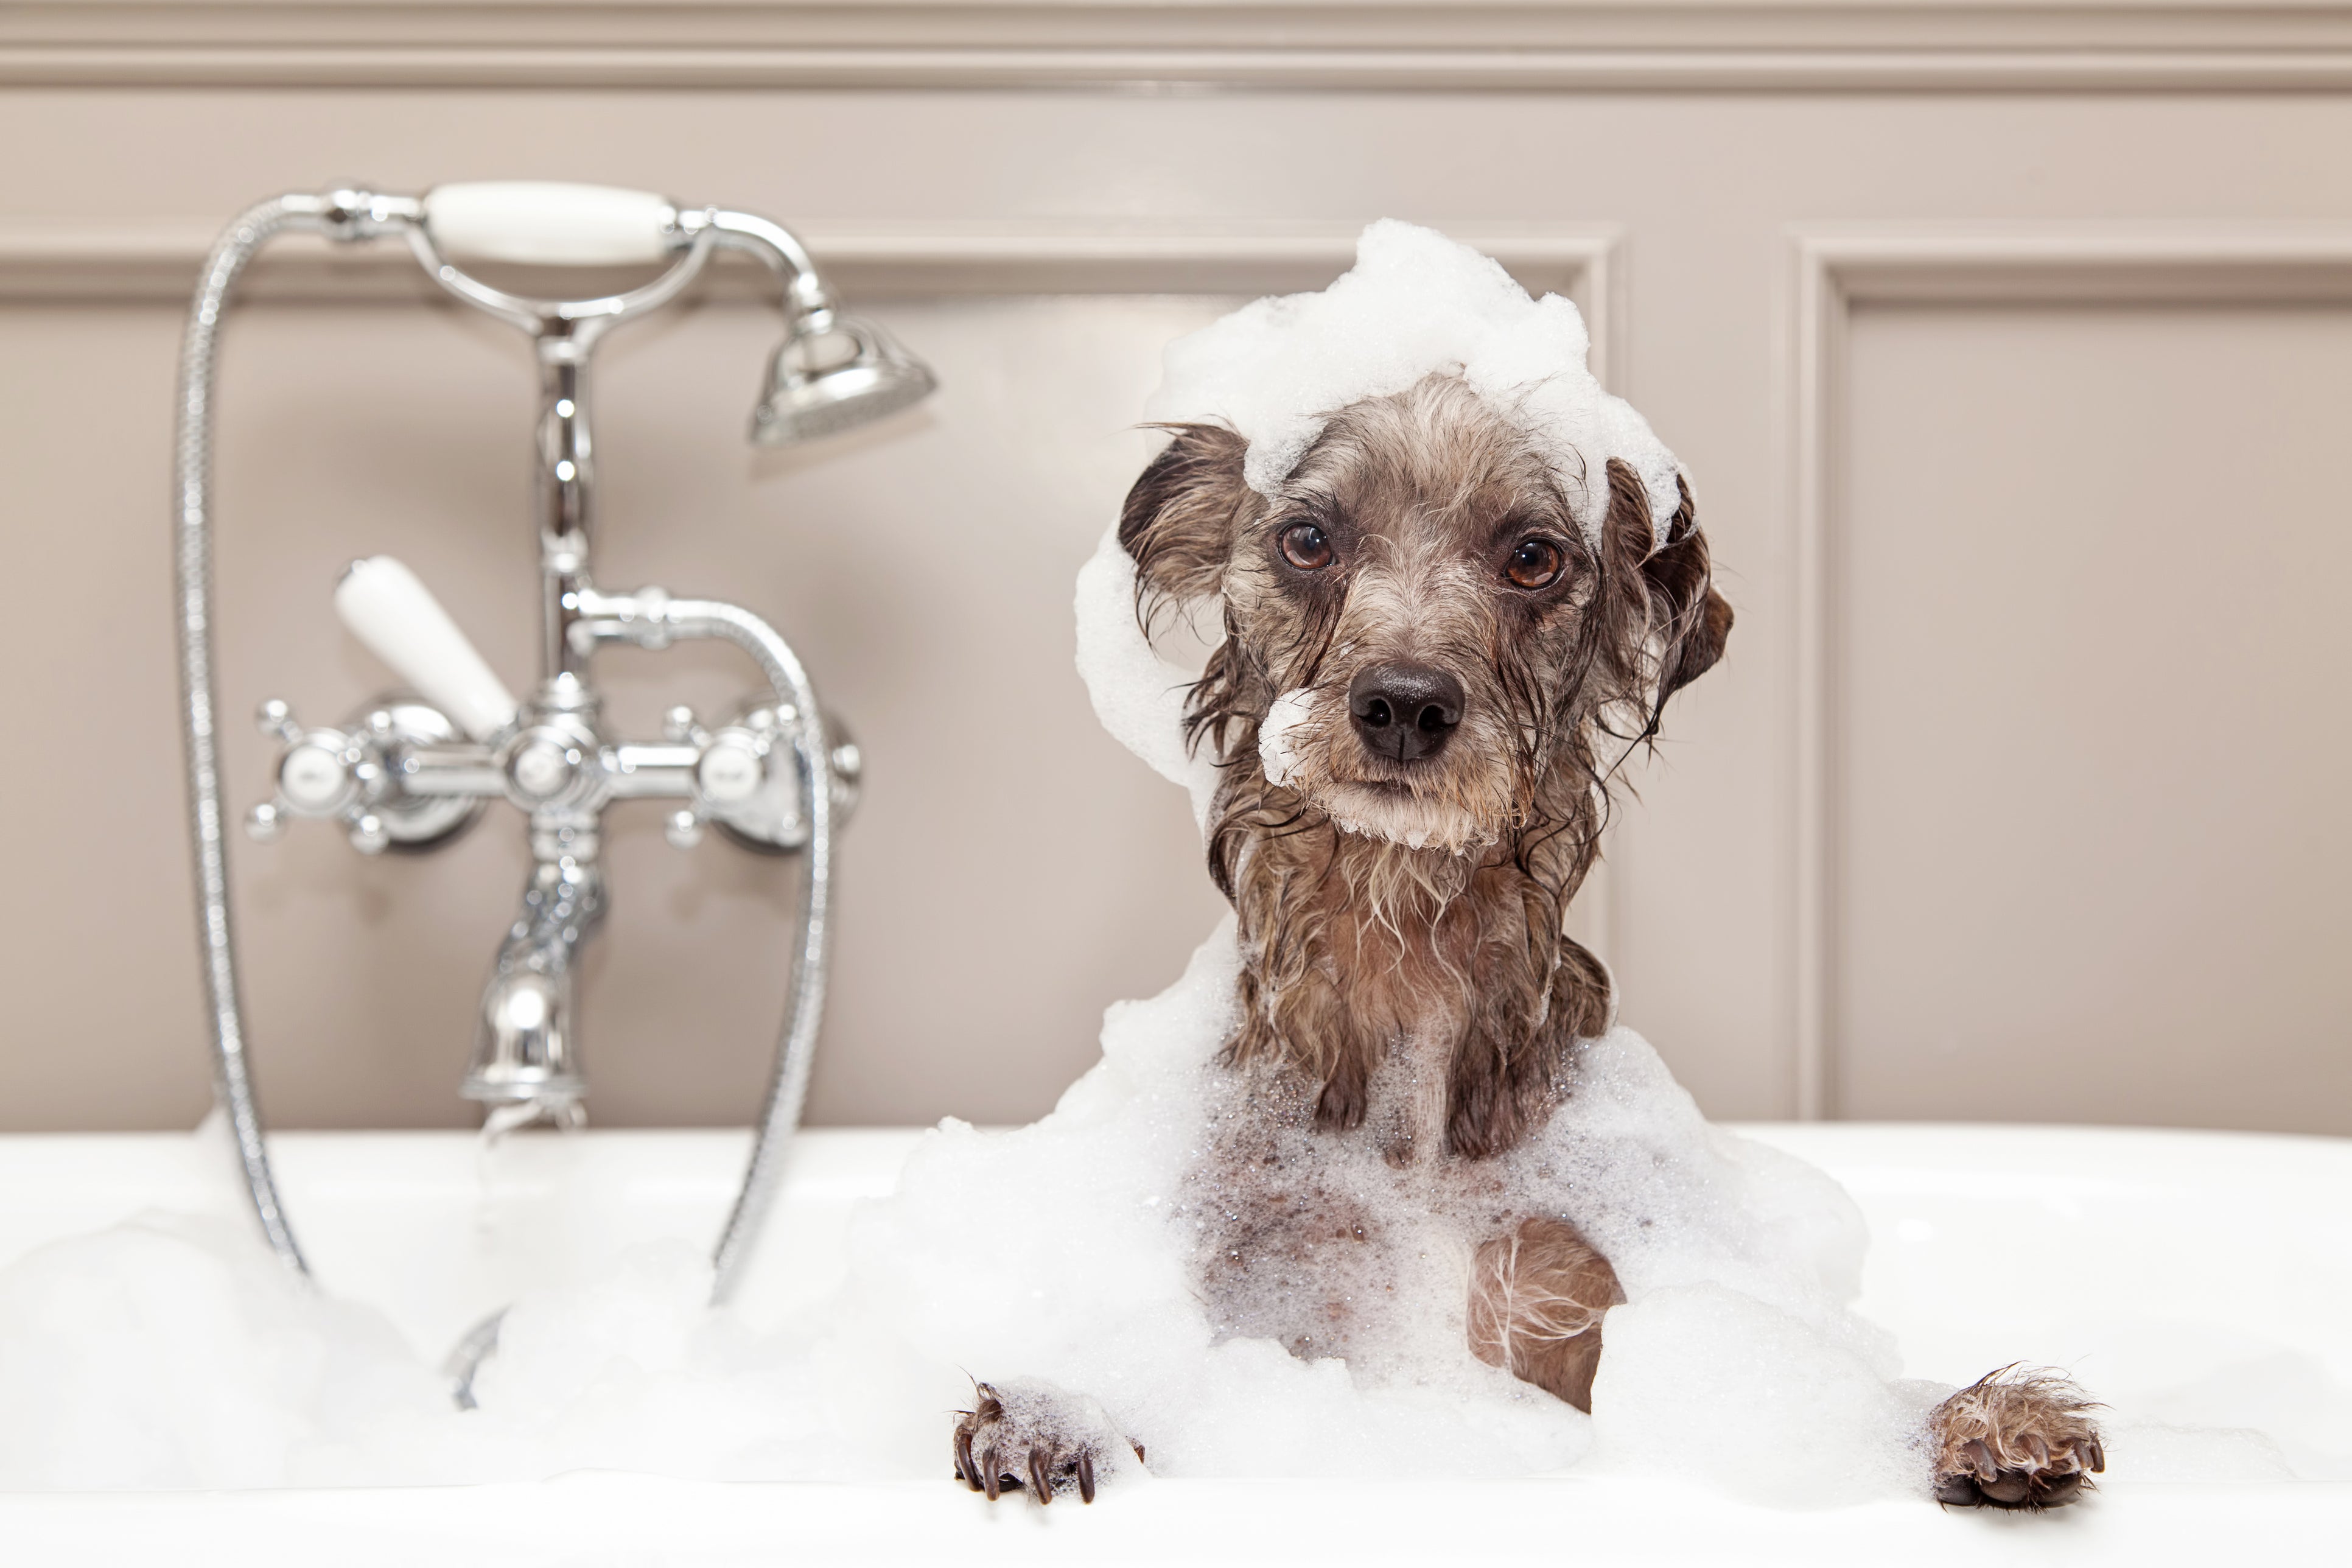 Grooming Your Dog: It’s Easier Than You Think!